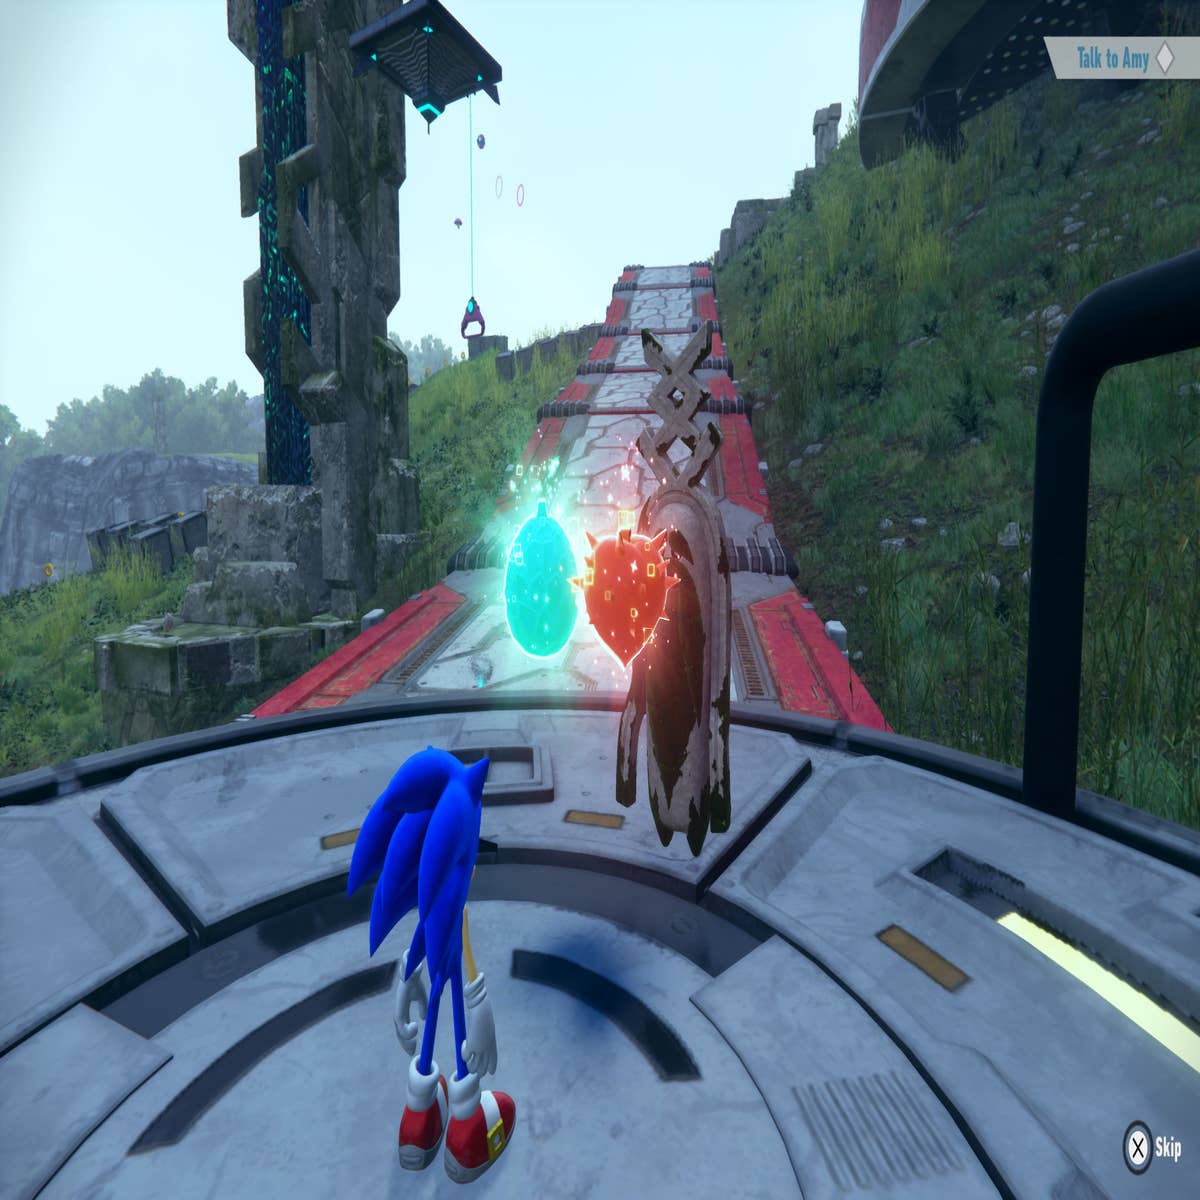 Sonic Frontiers gets first trailer showing open world combat